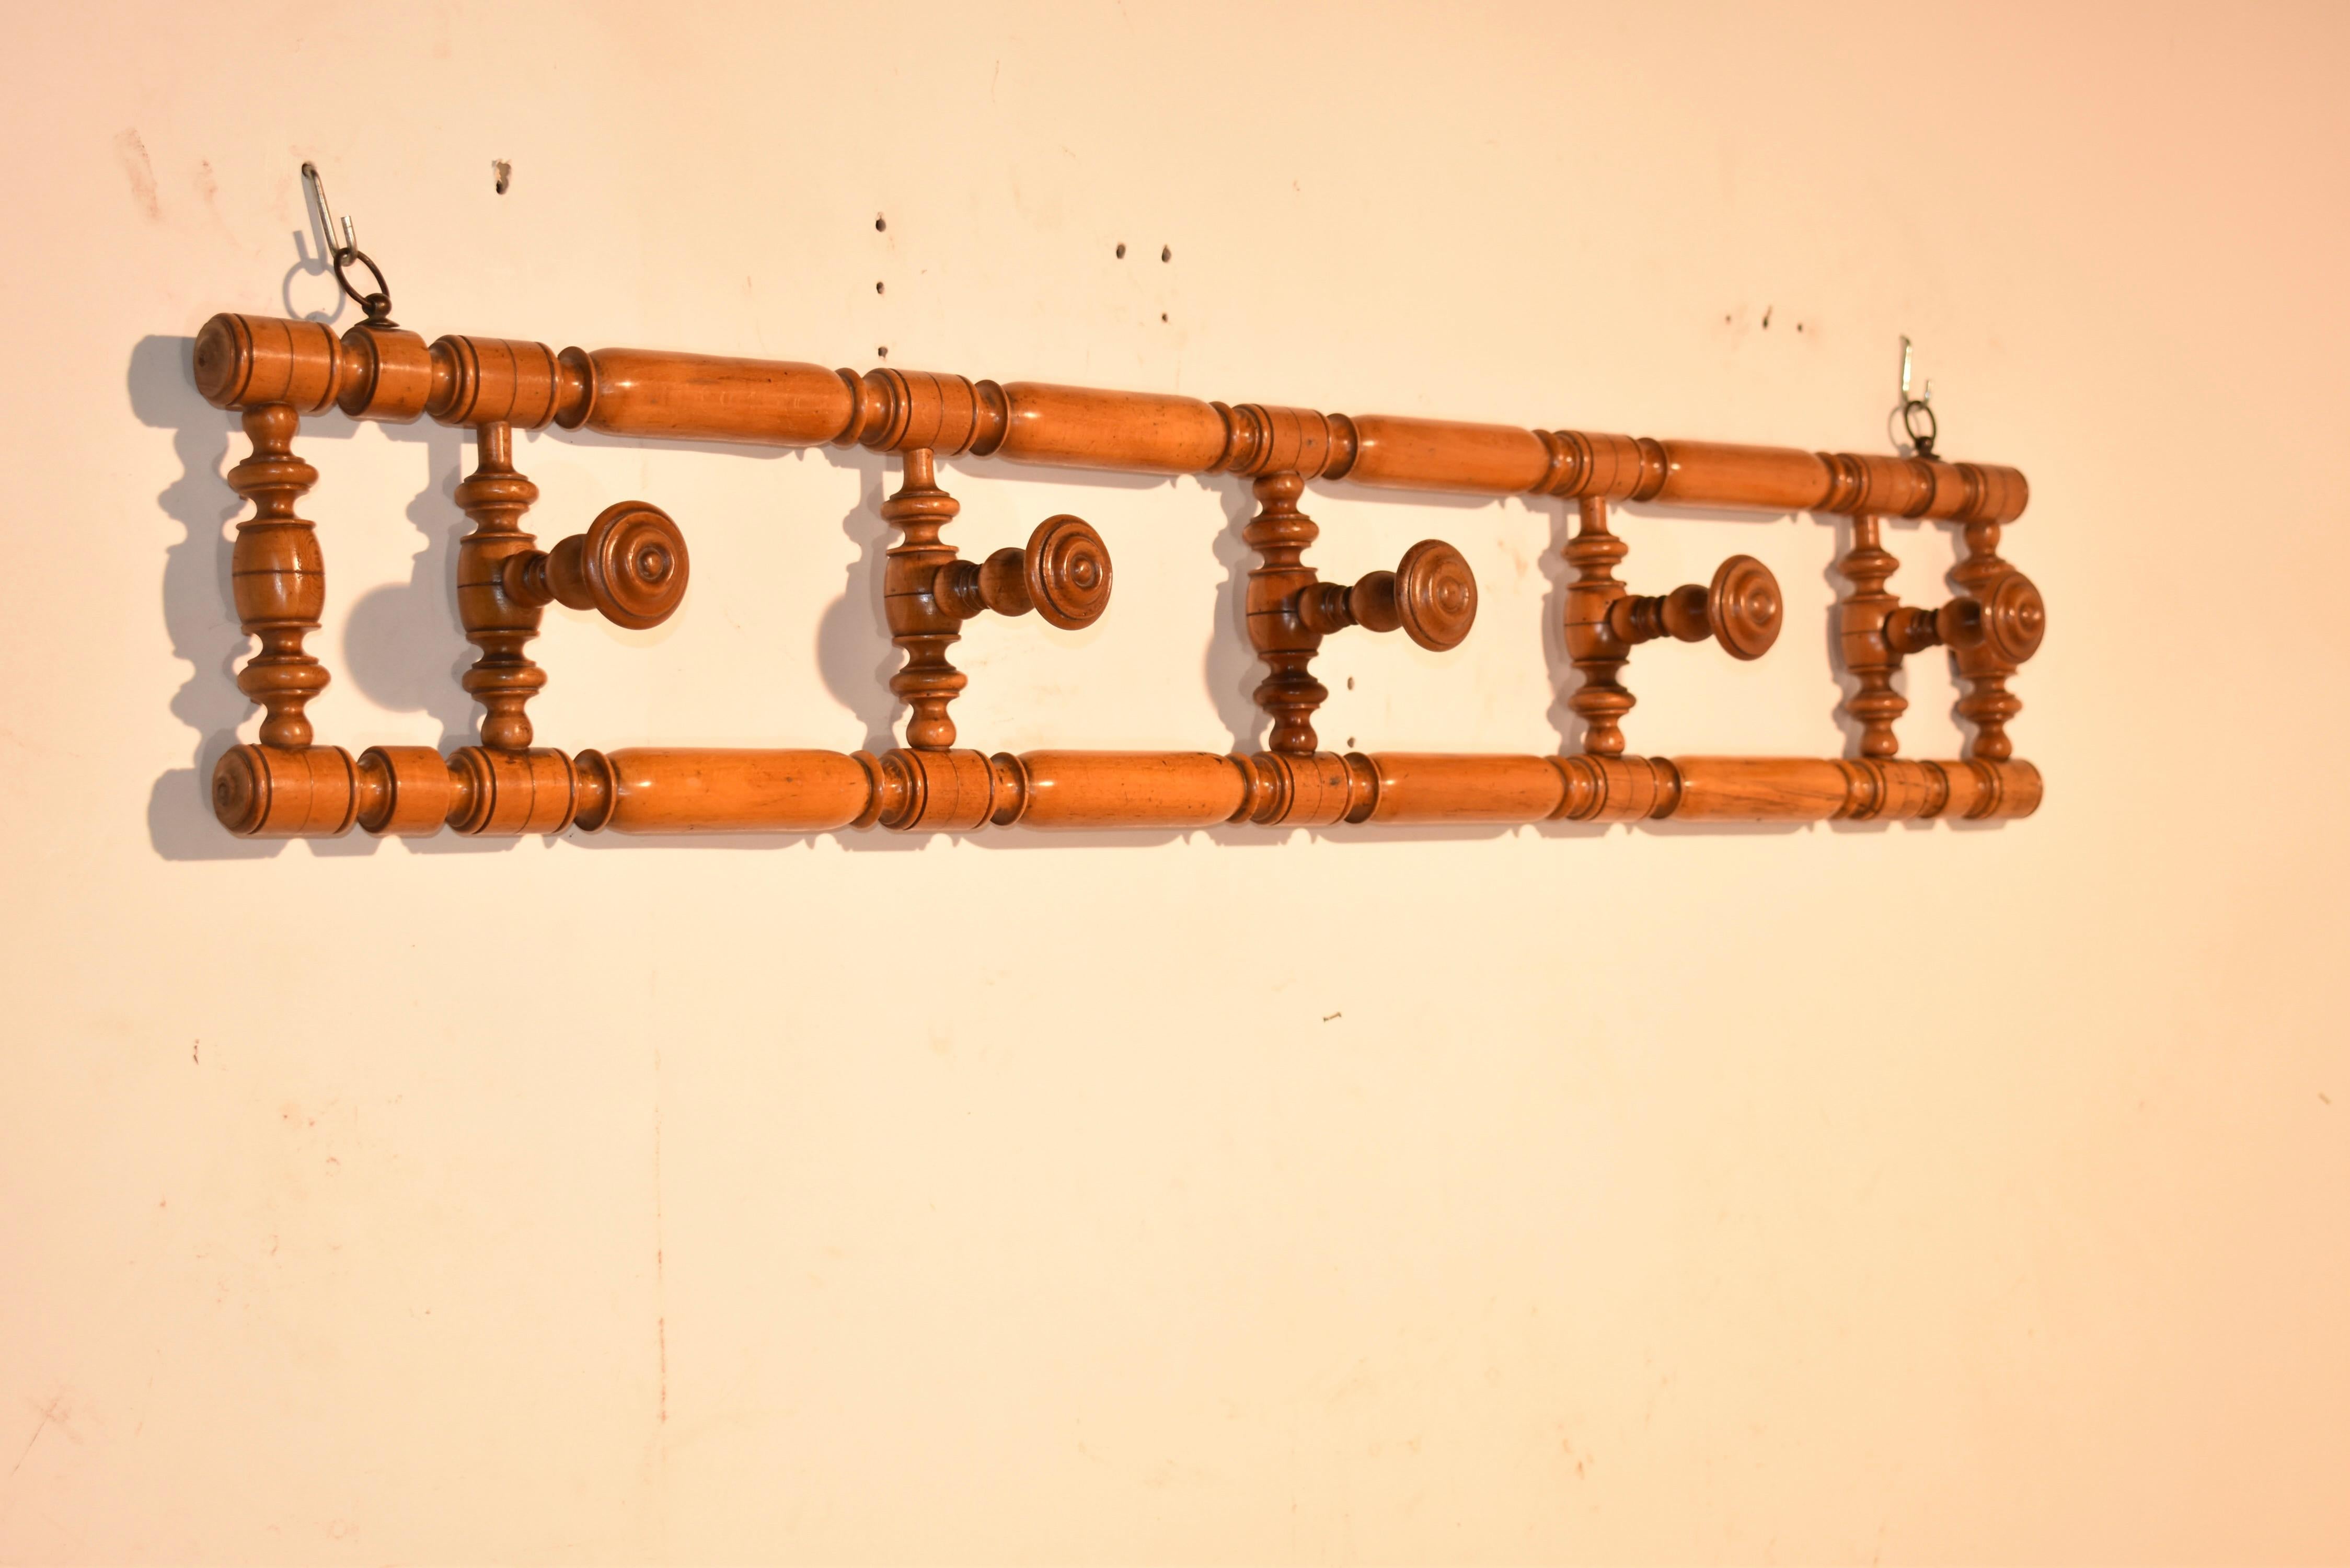 Cherry hat rack from France, circa 1910. The rack is lovely and is made from a hand turned frame, the sides of which are joined by seven turned spindles. Five of the spindles have turned pegs, which are wonderfully detailed. This is a wonderful